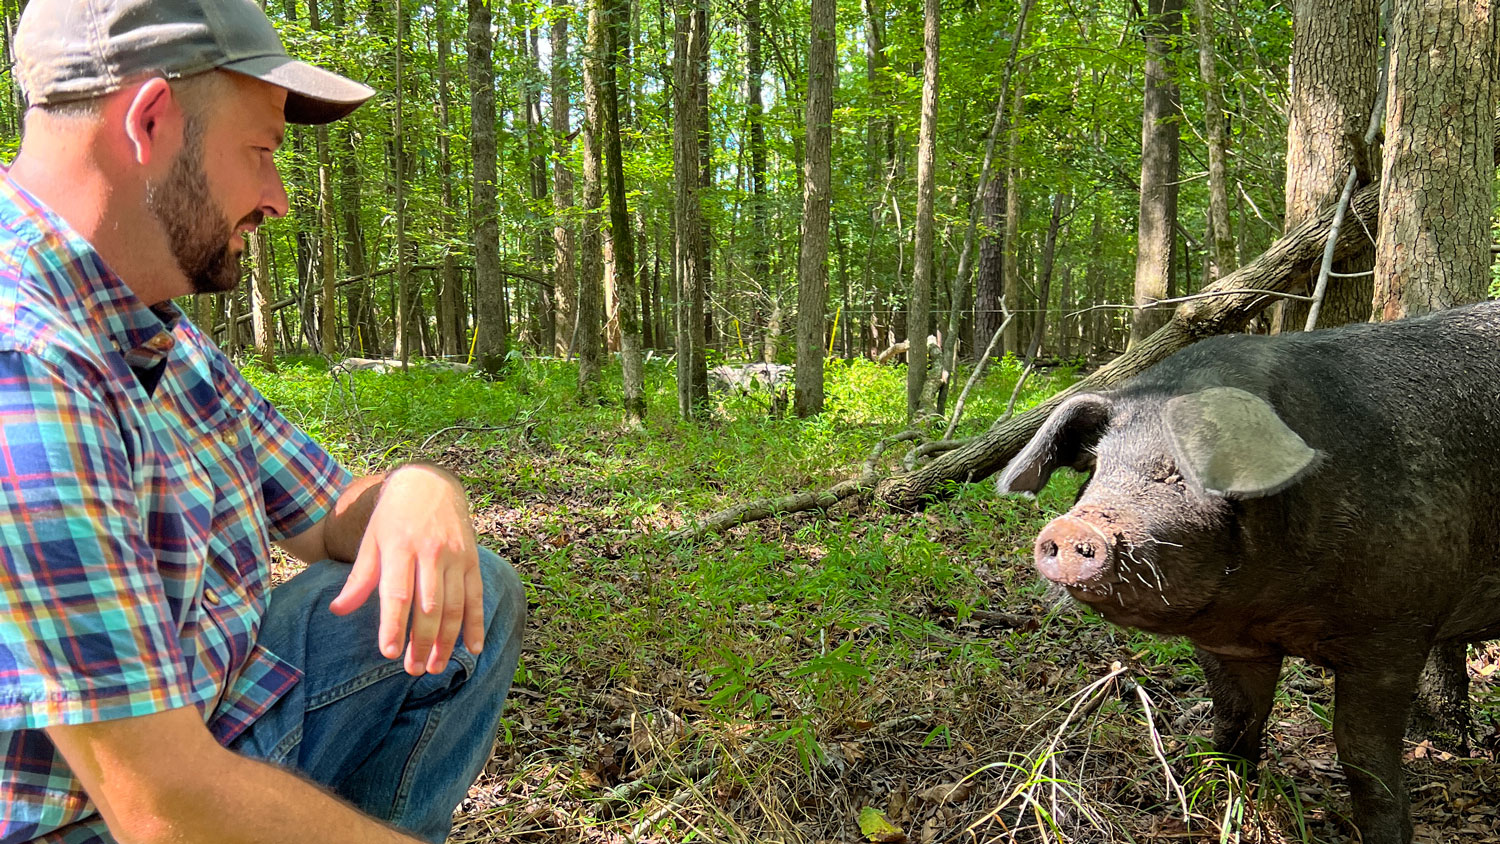 Farmer with pig in forest